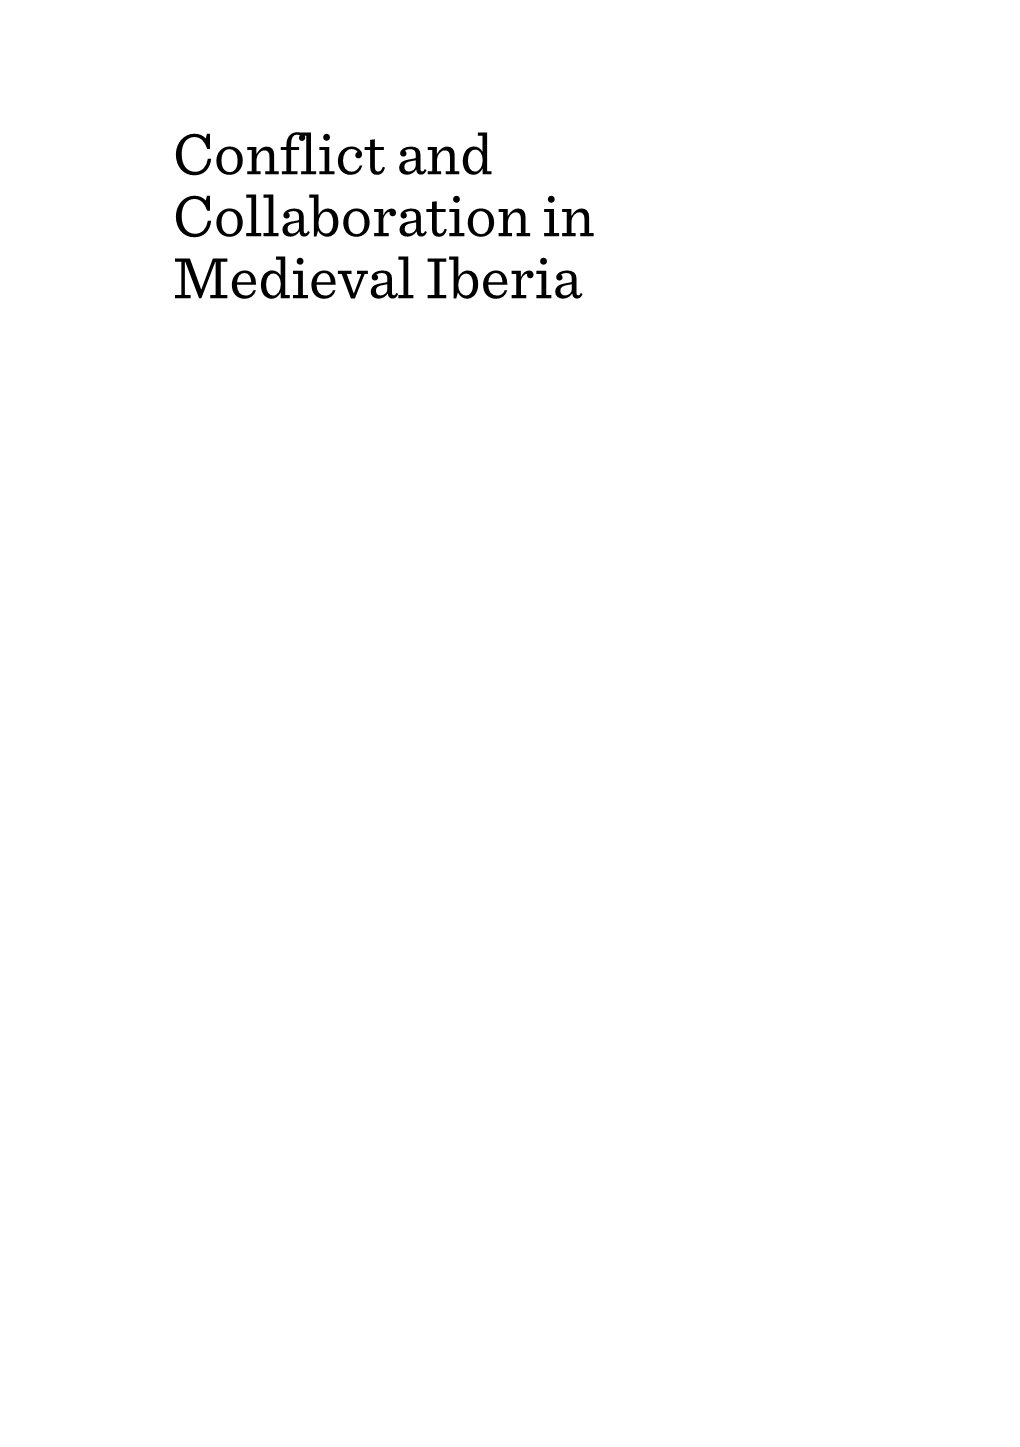 Conflict and Collaboration in Medieval Iberia